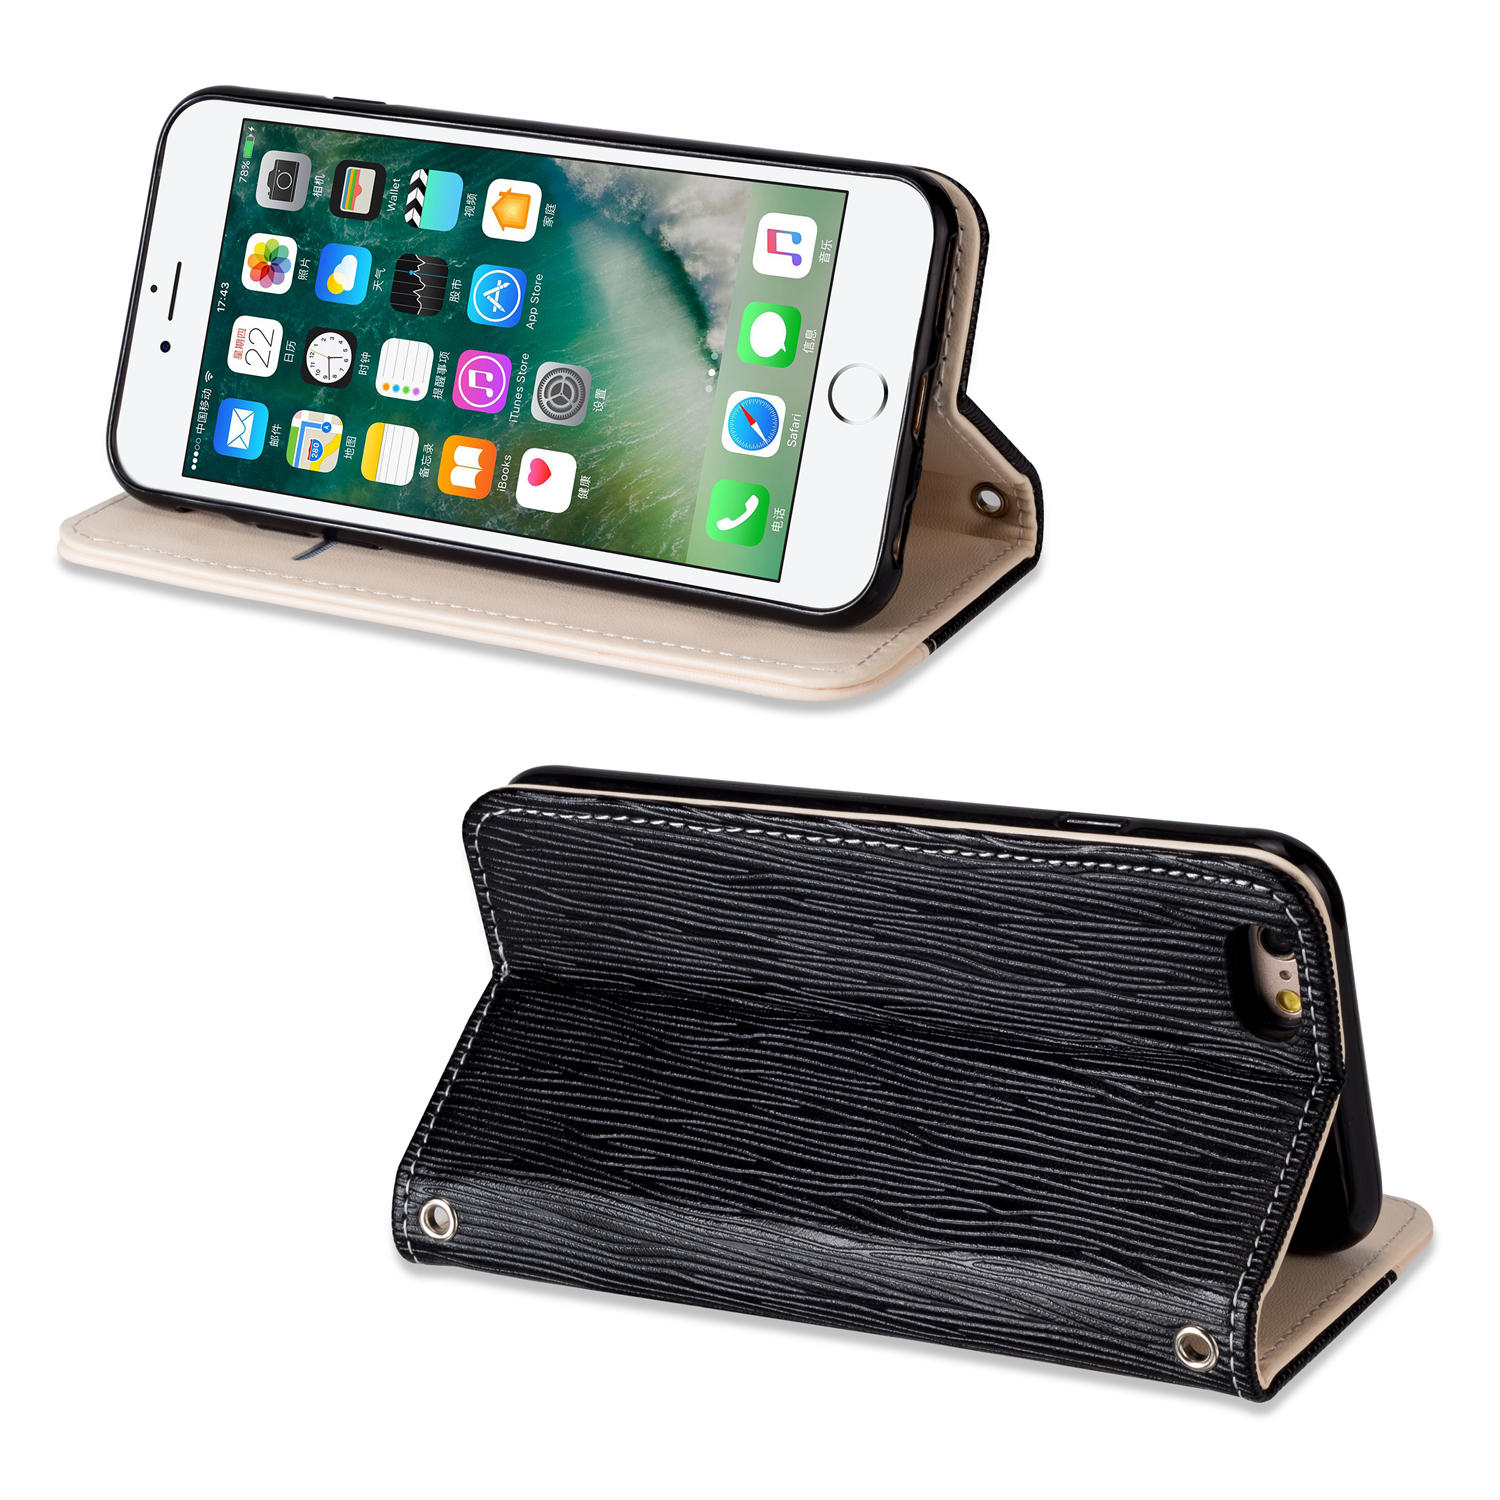 Bakeey Premium Magnetic Flip Card Slot Kickstand Protective Case For iPhone 6/iPhone 6s COD